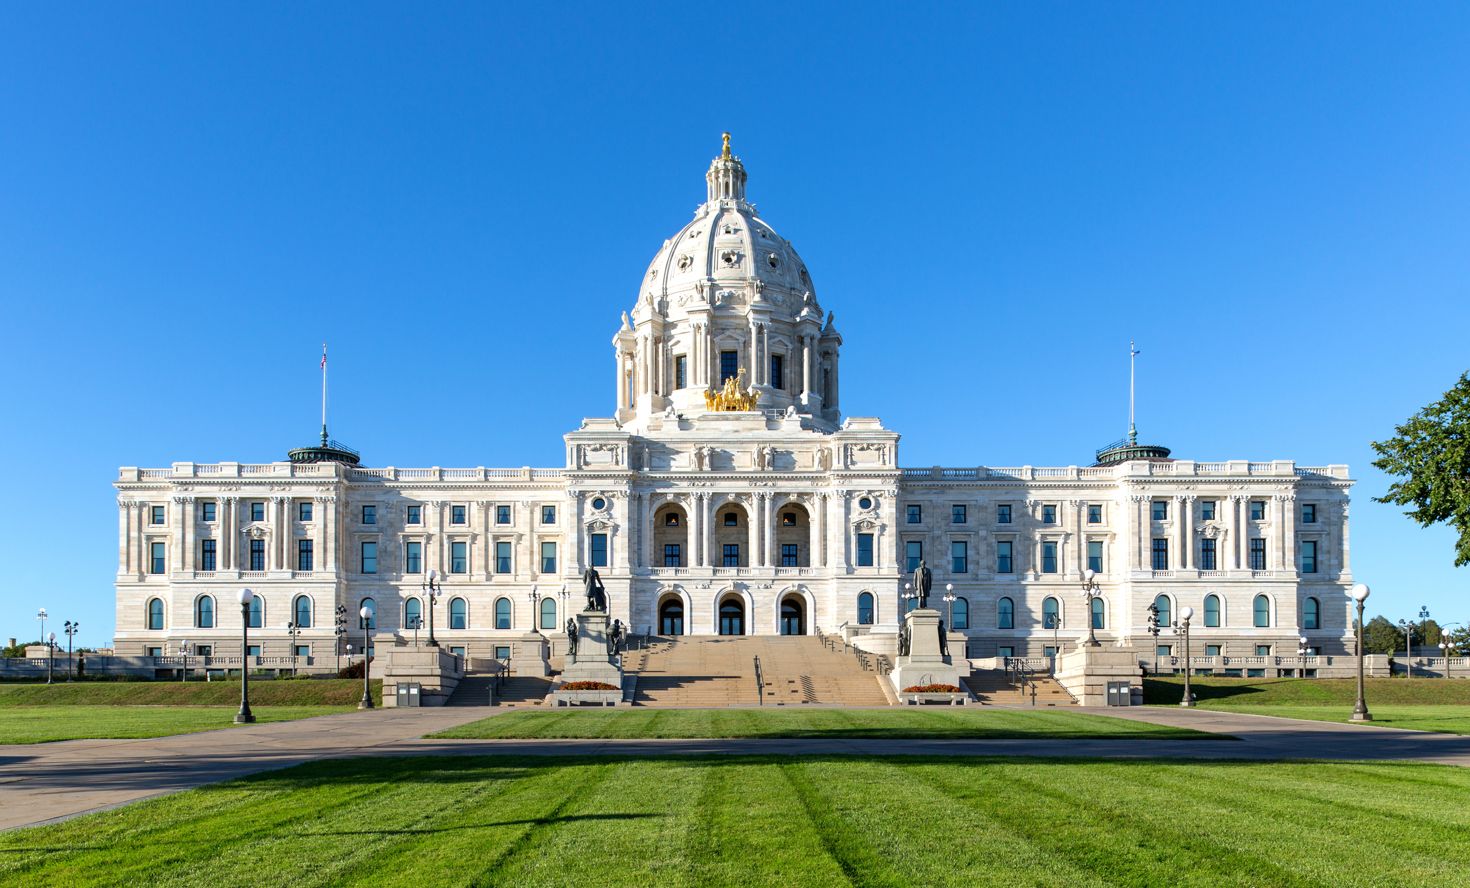 Minnesota public safety officials suggest avoiding Capitol this